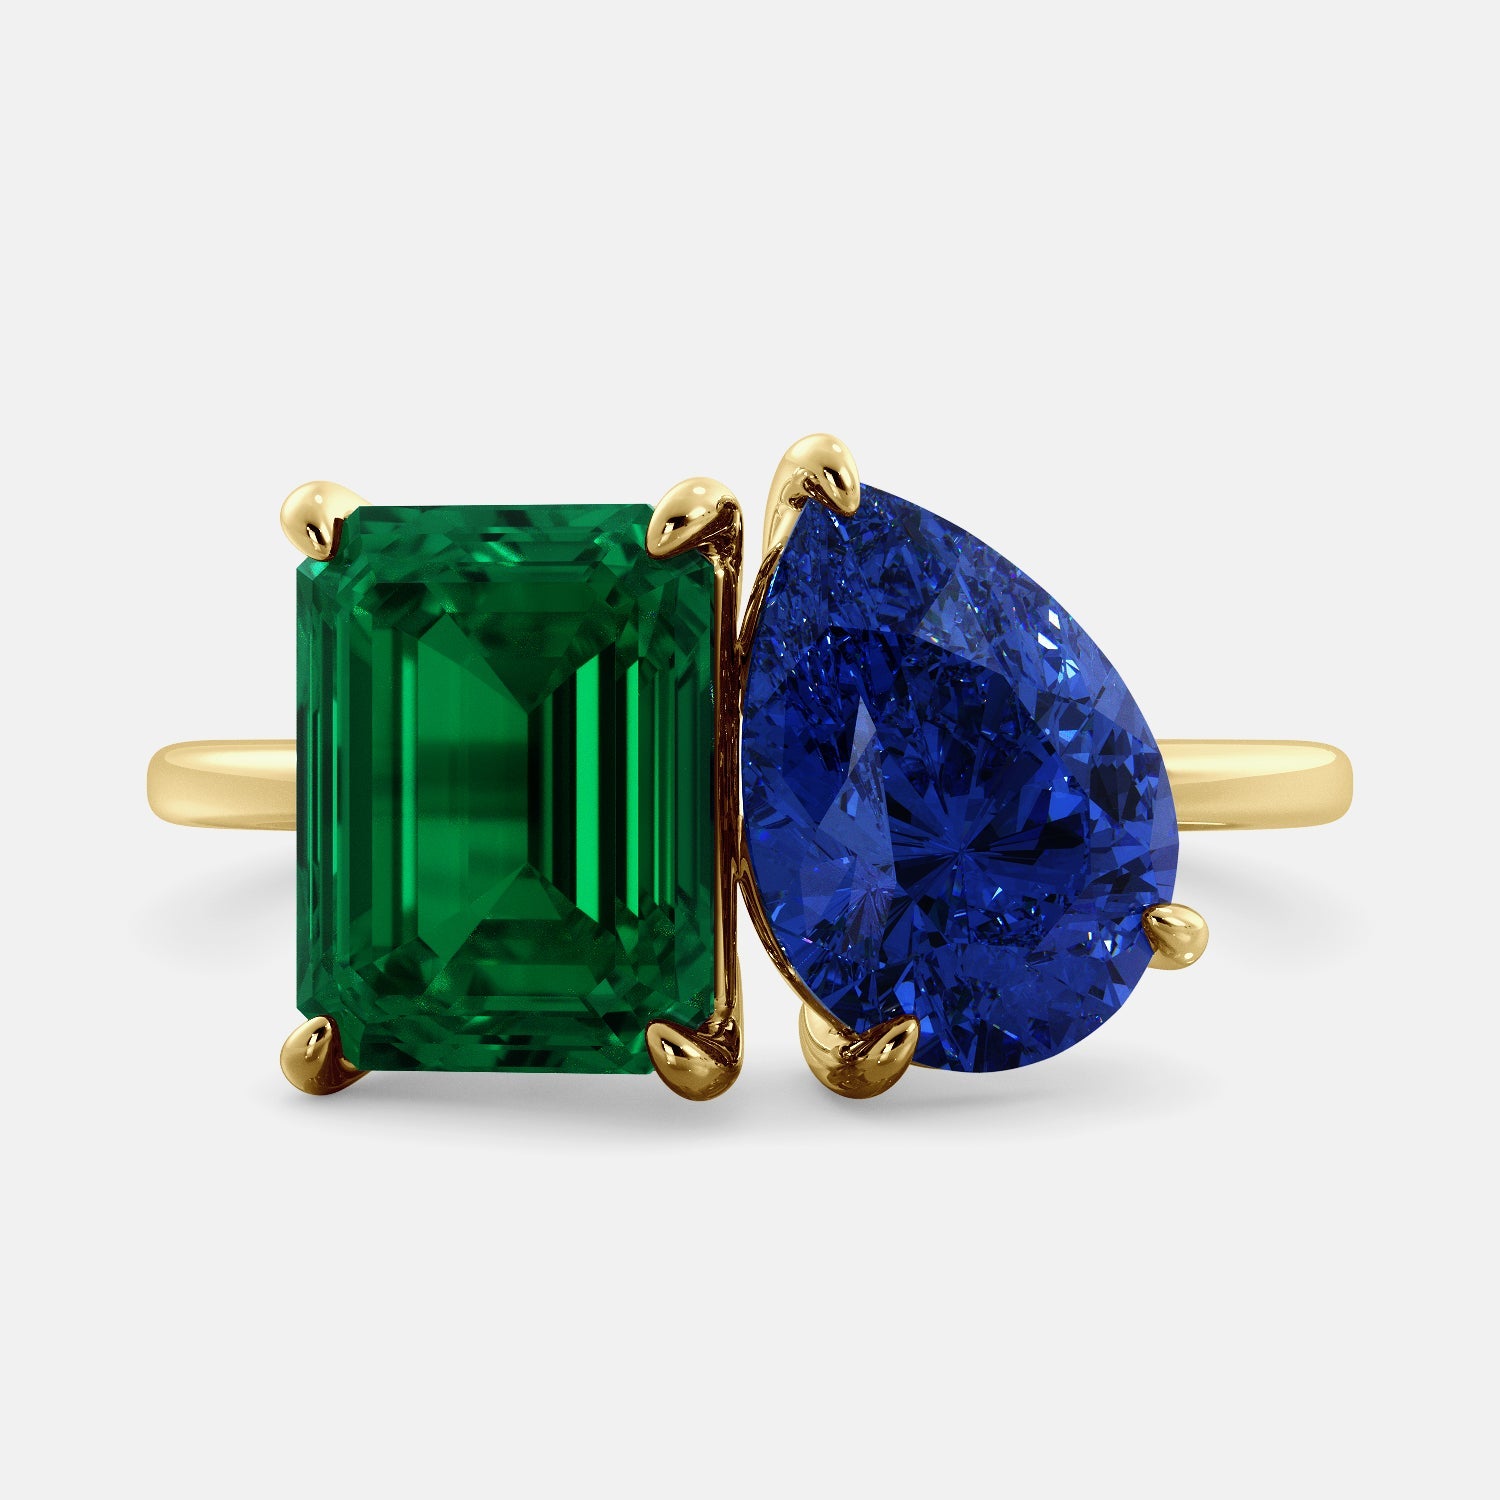 Birthstone Ring with two lab-grown diamonds, Emerald and pear Diamond Shape, with yellow recycled 14K gold